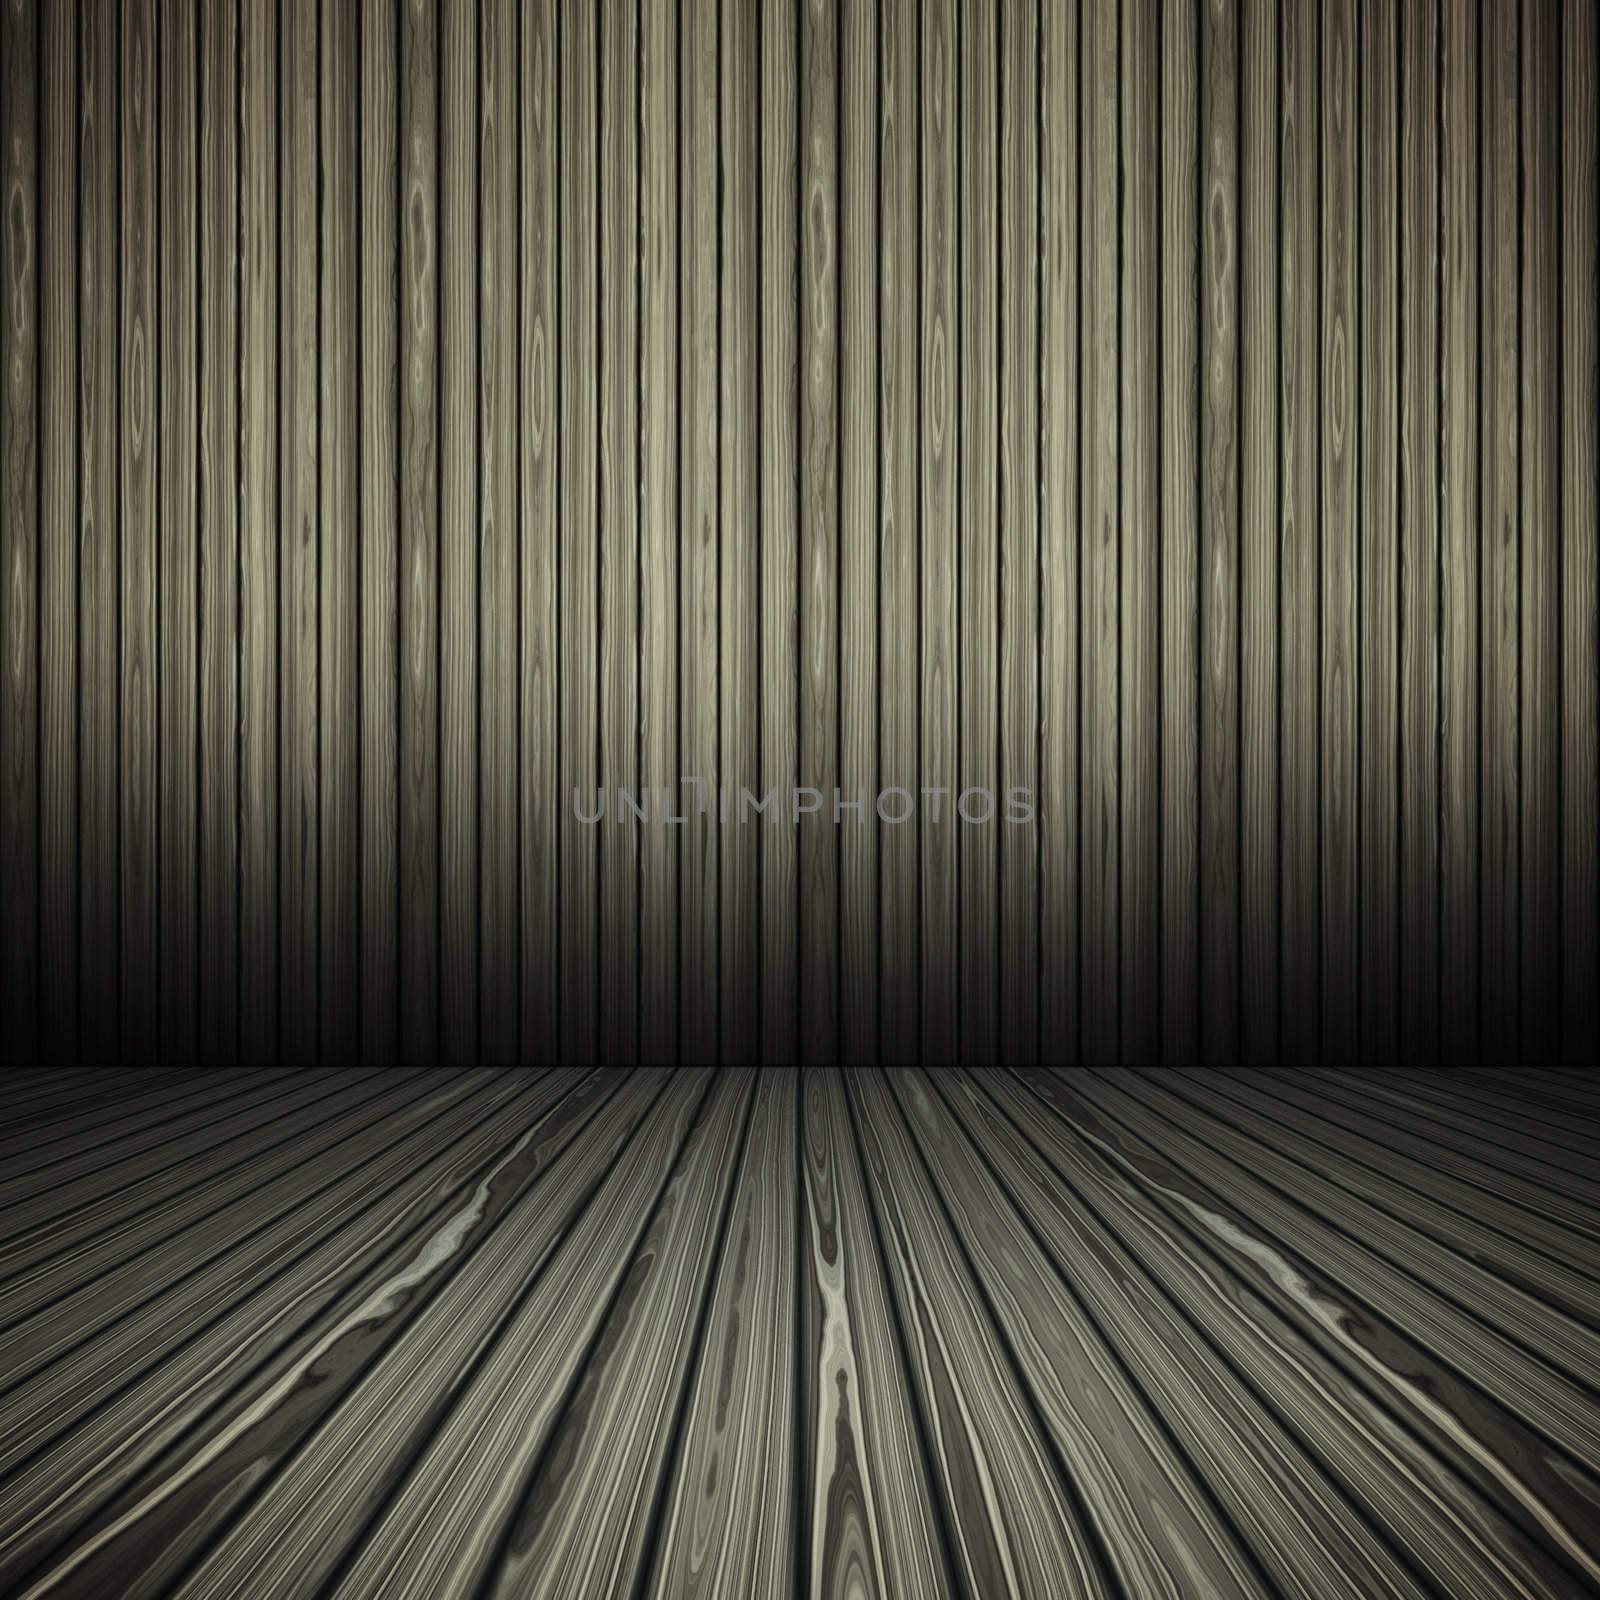 An image of a nice wooden floor for your content